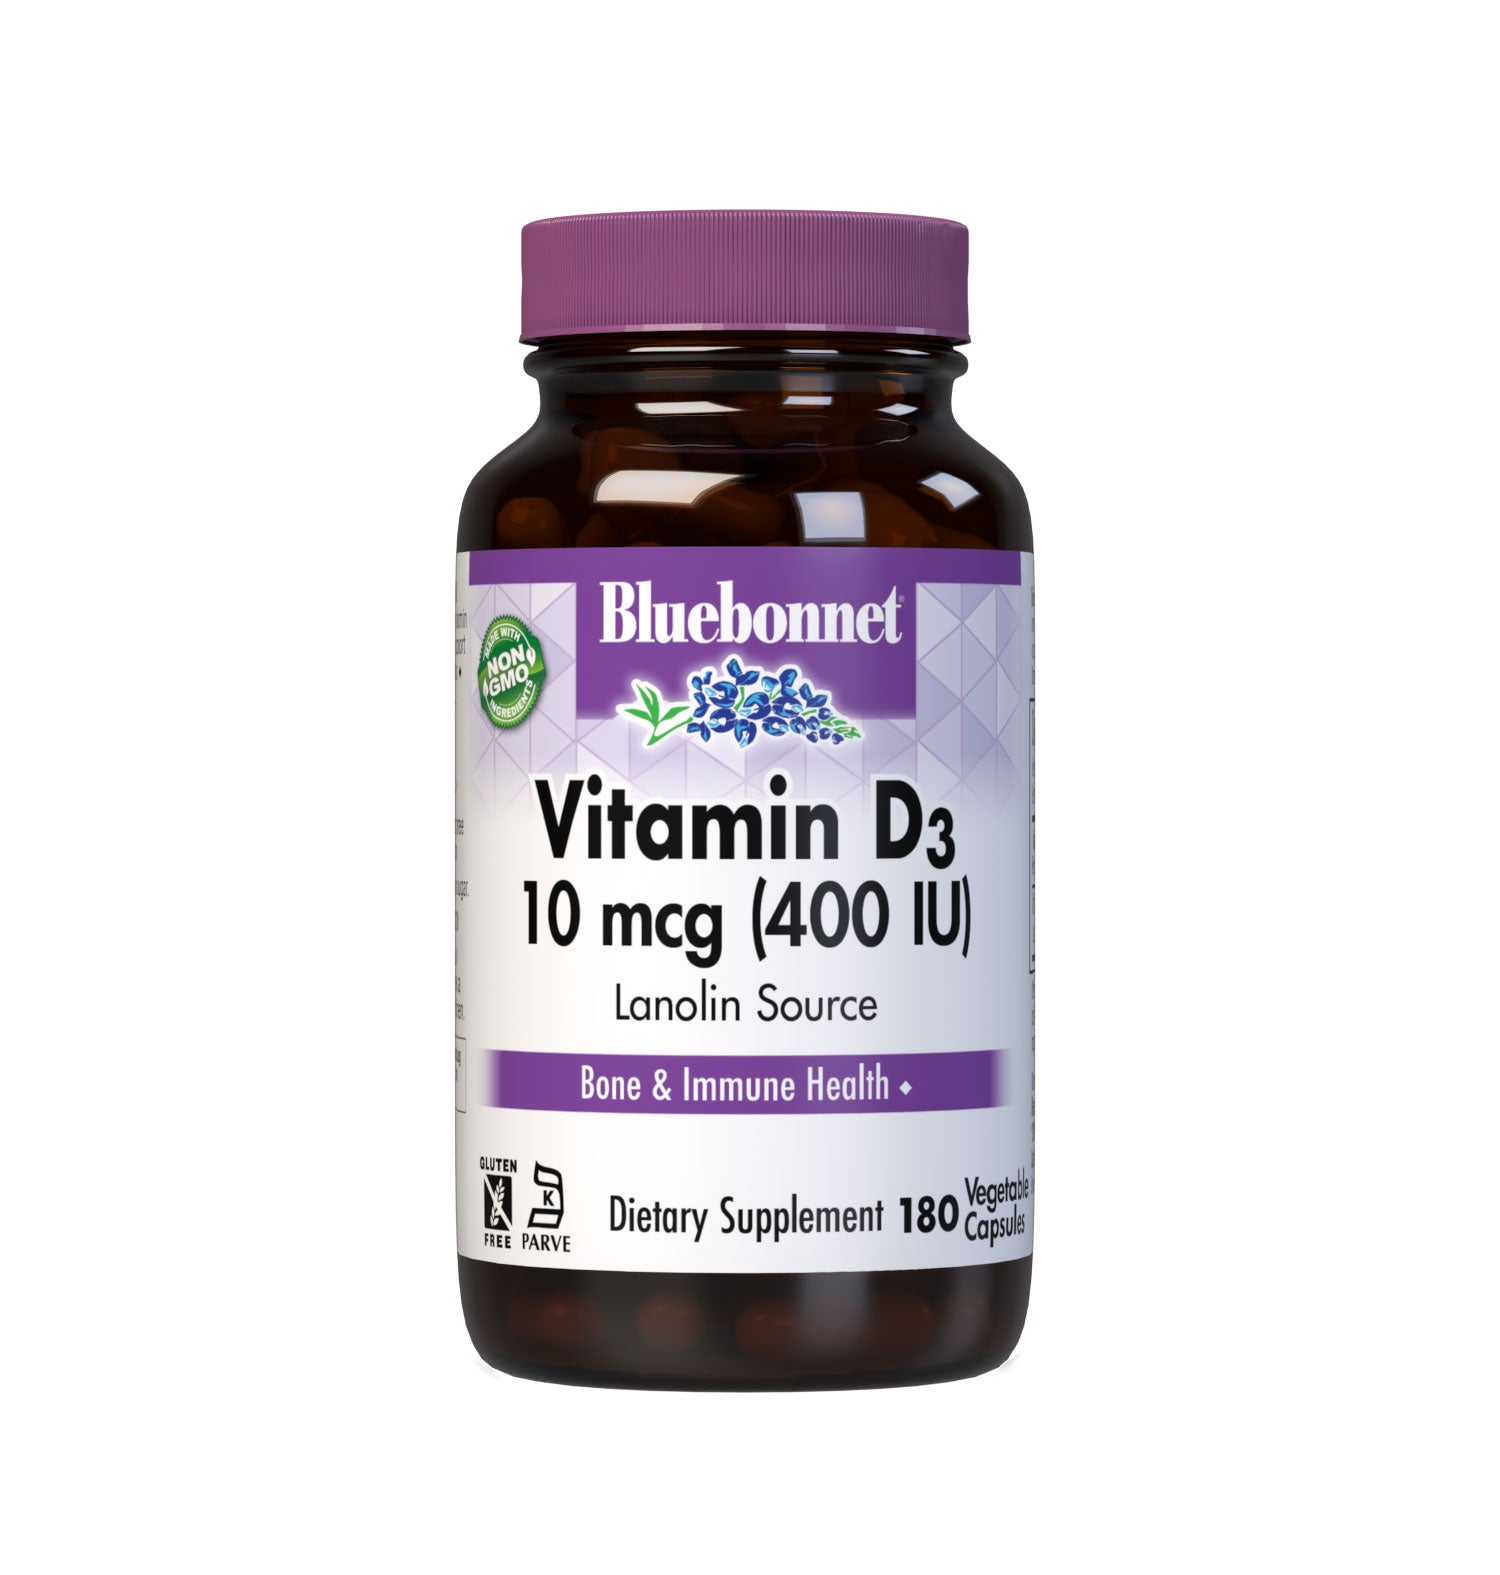 Bluebonnet’s Vitamin D3 10 mcg (400 IU) 180 Vegetable Capsules are formulated with vitamin D3 (cholecalciferol) from lanolin to help support strong, healthy bones and immune function. #size_180 count